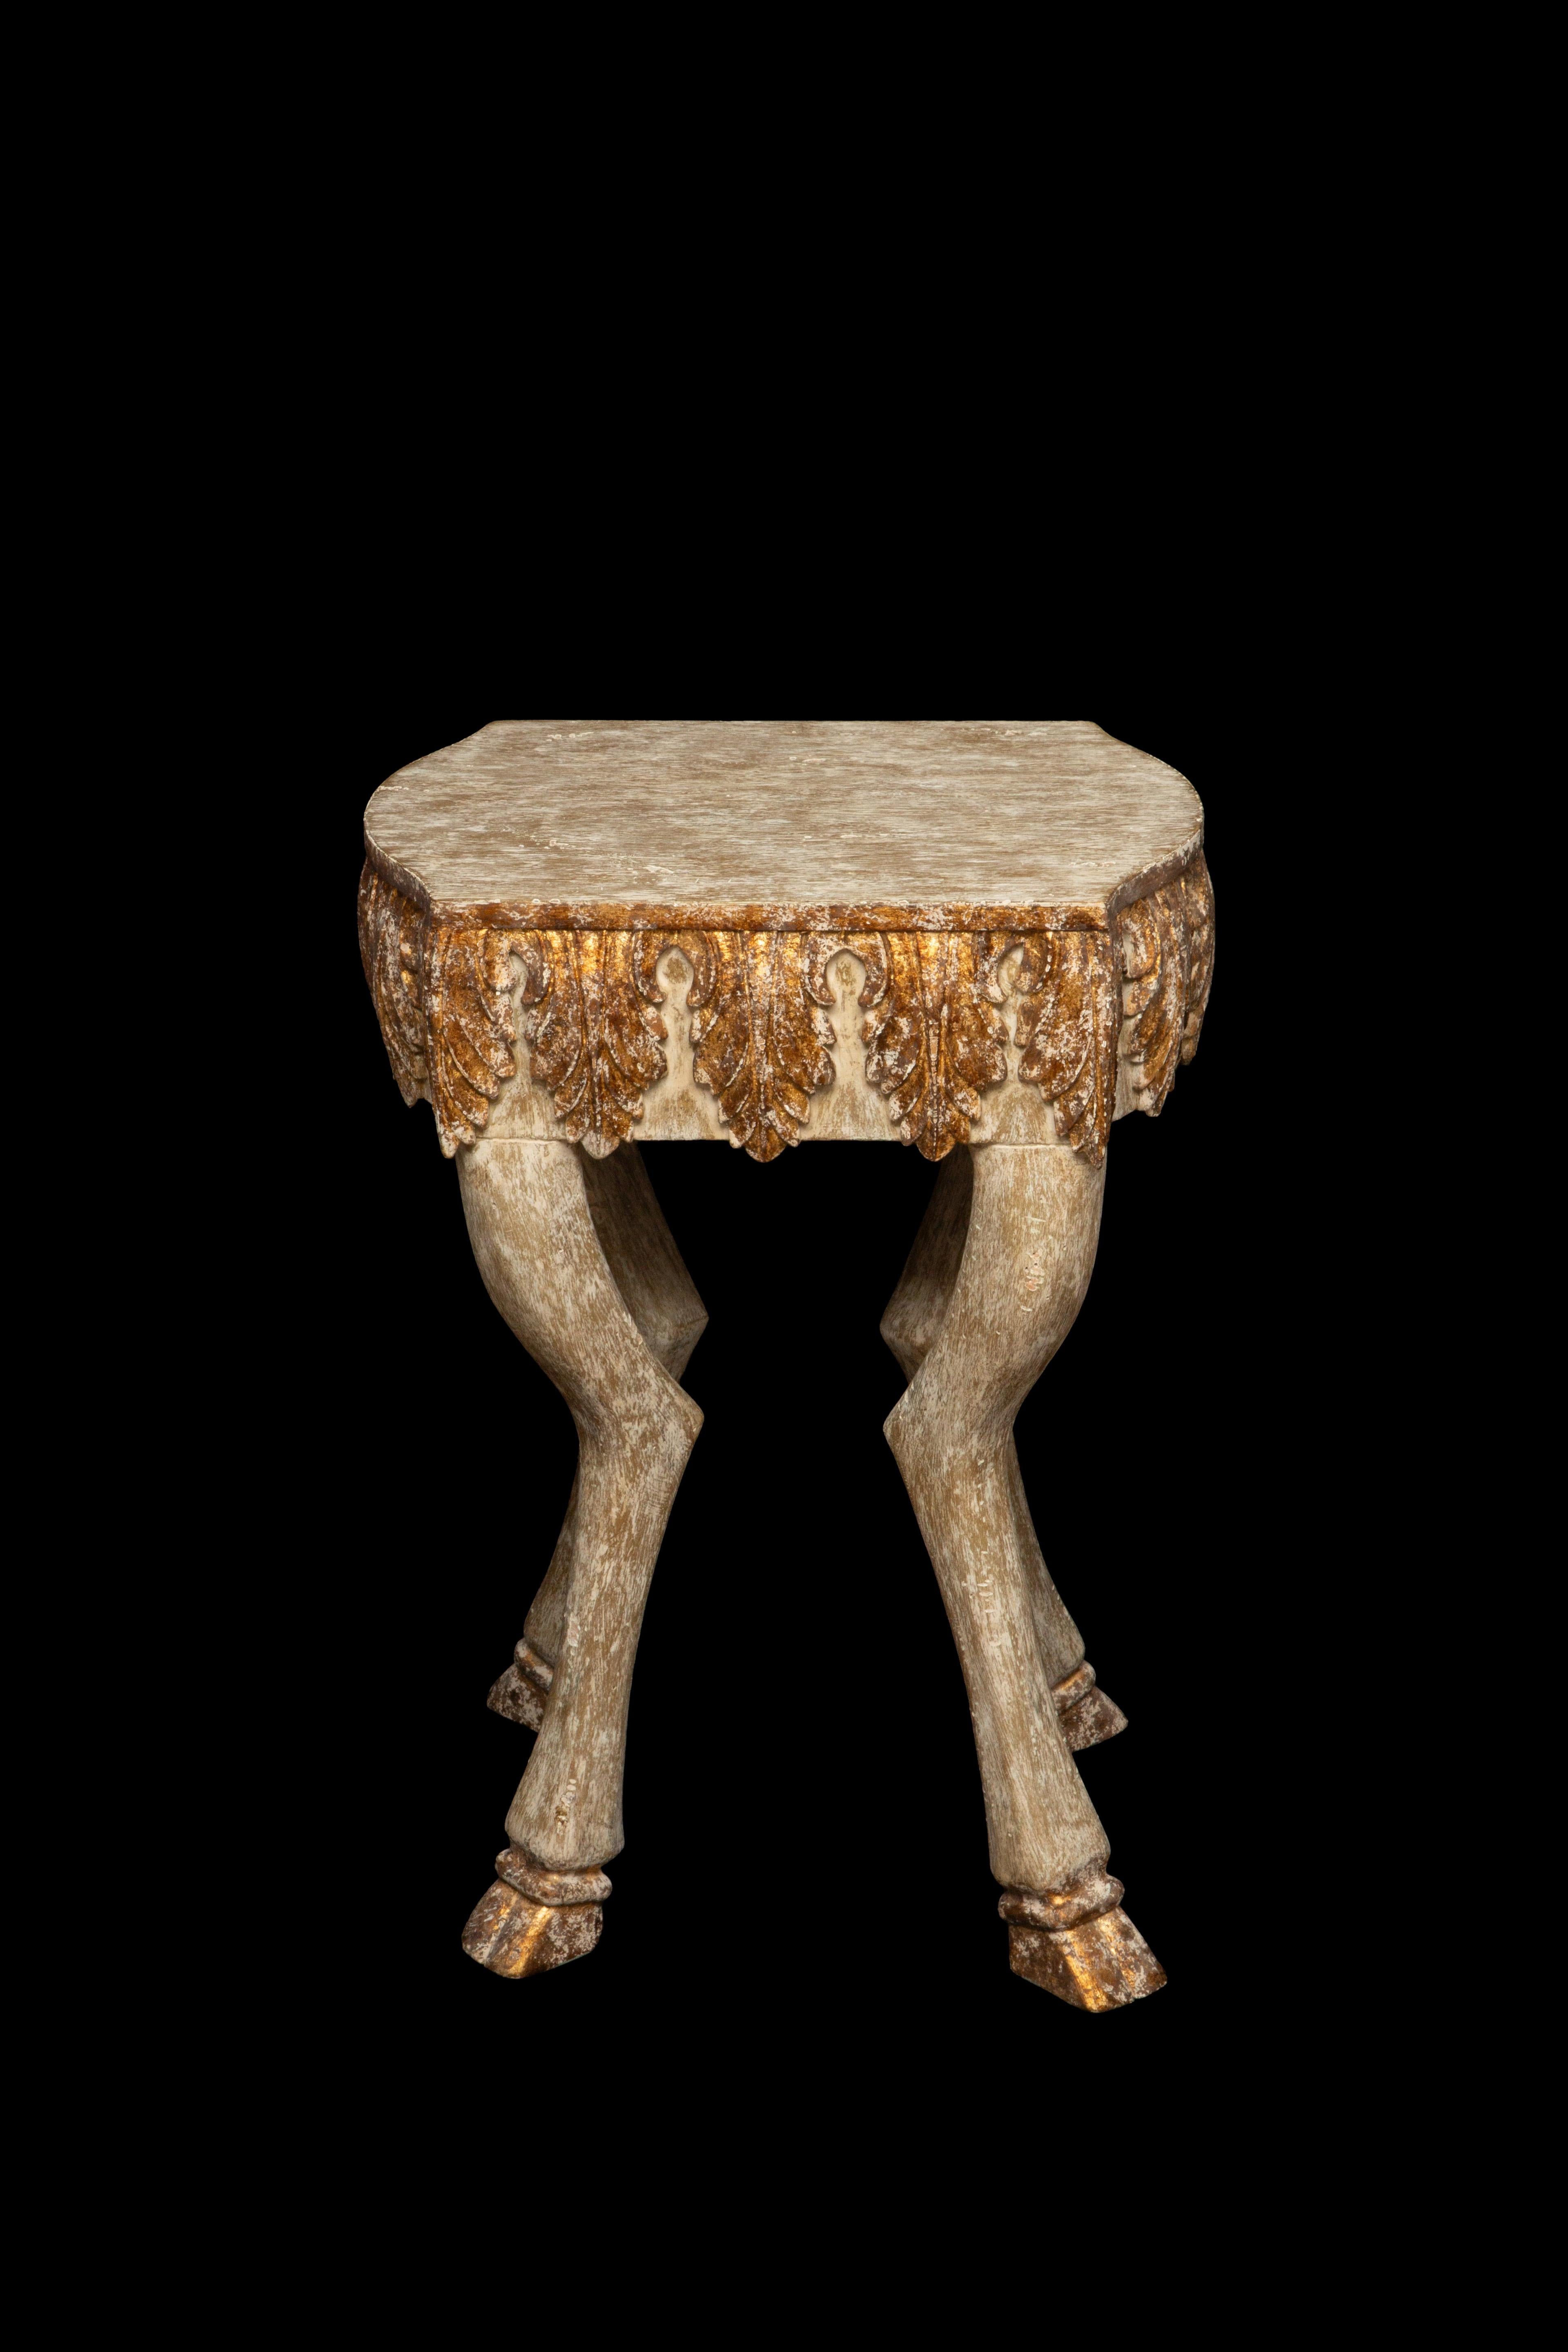 Exquisite Carved Wood Side Table featuring a stunning white-washed finish adorned with delicate gilded accents, all supported by intricately carved hoof legs. Crafted with meticulous attention to detail, this charming side table from the renowned